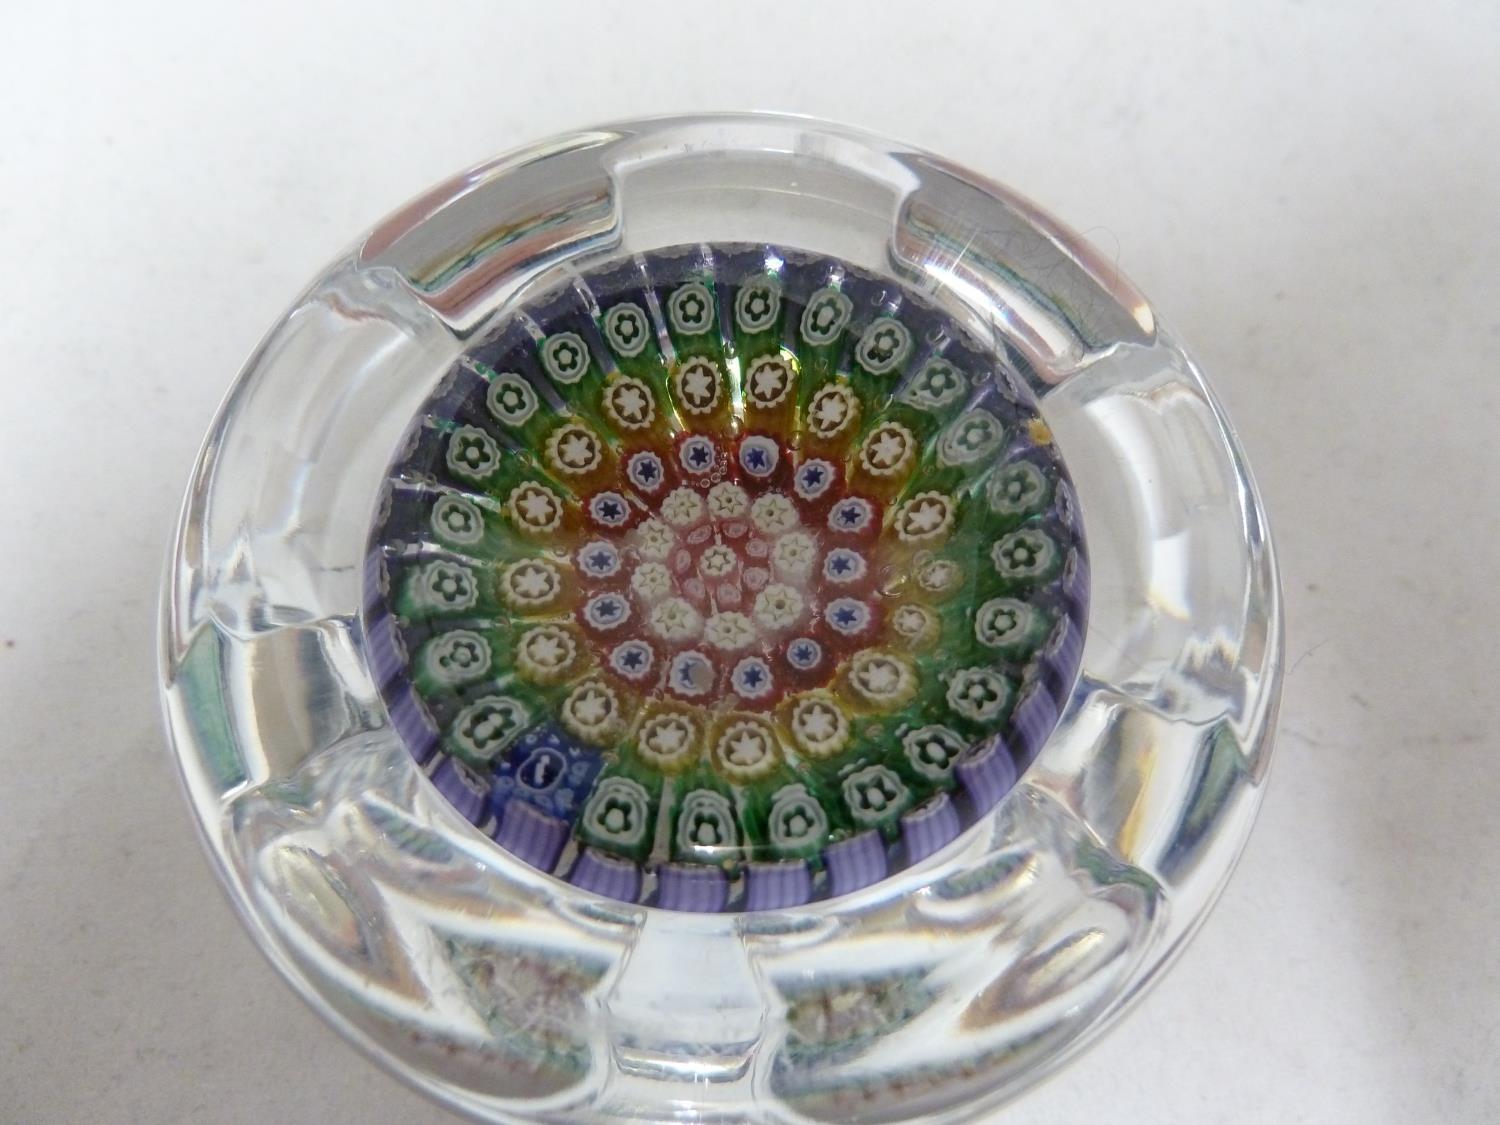 Whitefriars - a glass paperweight, concentric millifiori, window cut, 1977, 6 cm diam approx - Image 4 of 4